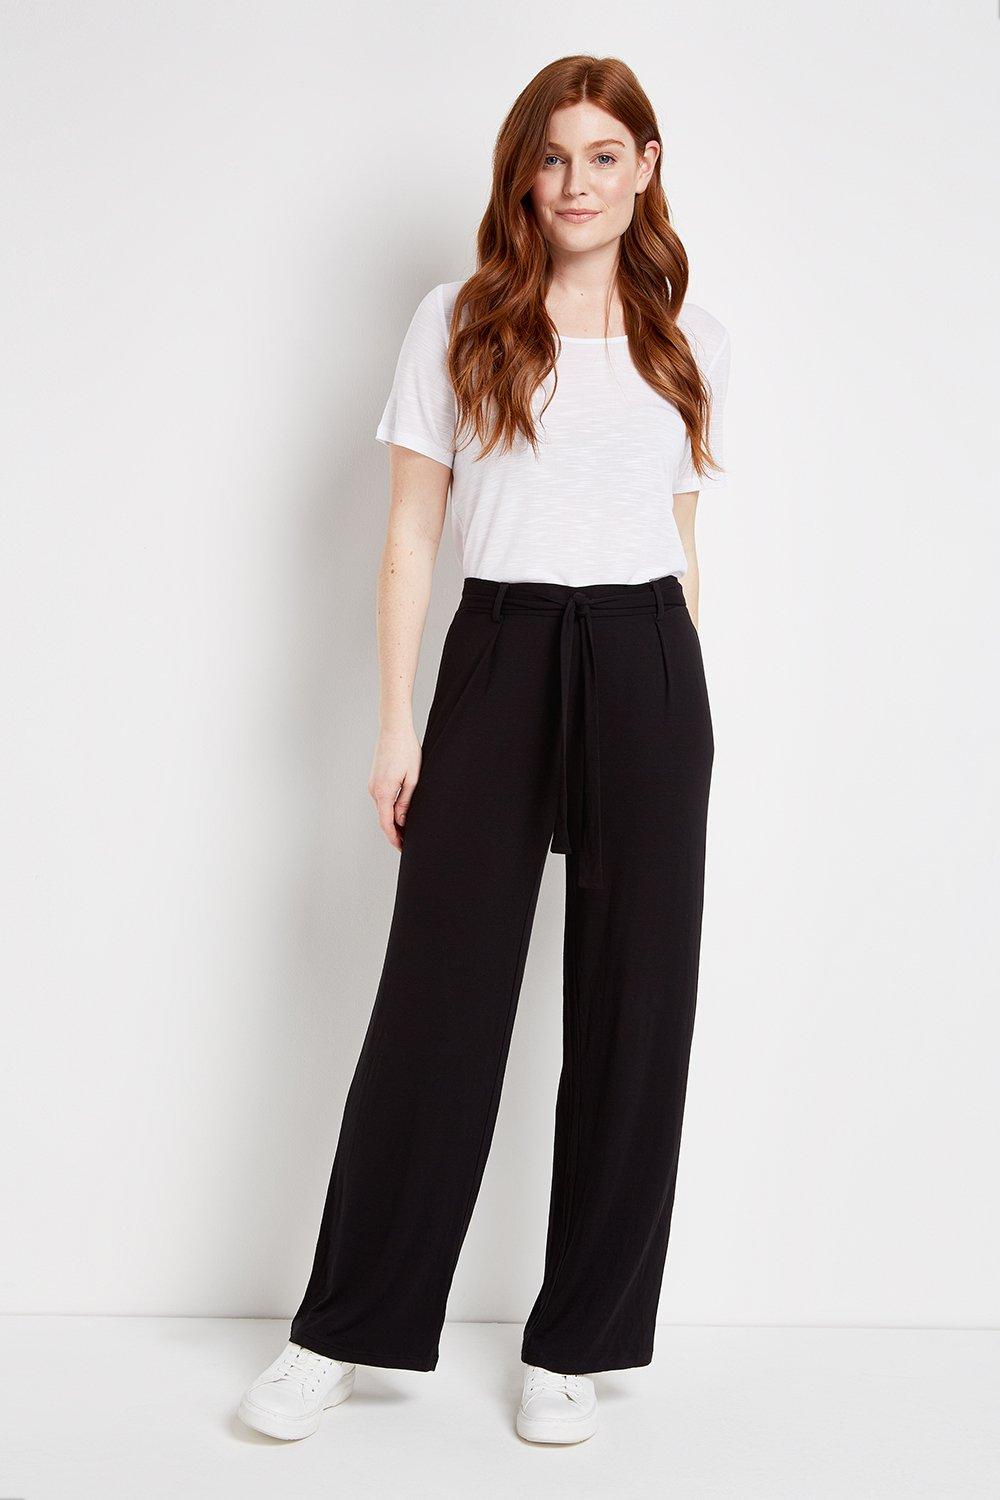 Refresh Your Wardrobe Staples With These Classic Black Trousers. A Wide Leg Cut Gives These A Contemporary Feel, Whilst A Sleek Black Hue Keeps Them Sophisticated.  Trousers Wide Leg Relaxed Casual 94% Viscose,6% Elastane Machine Washable